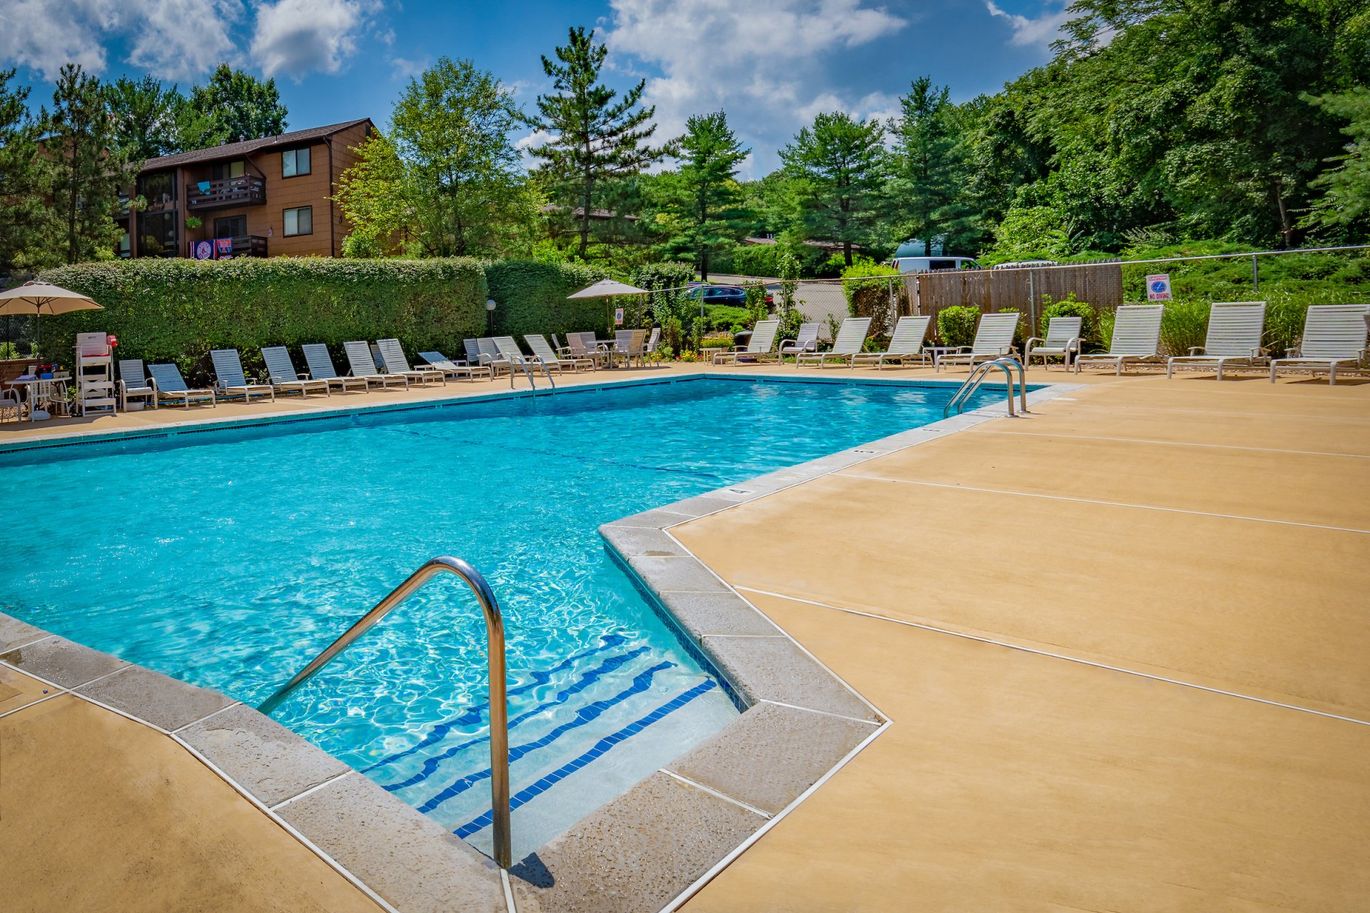 Swimming Pool - Apartments For Rent in Dover, NJ